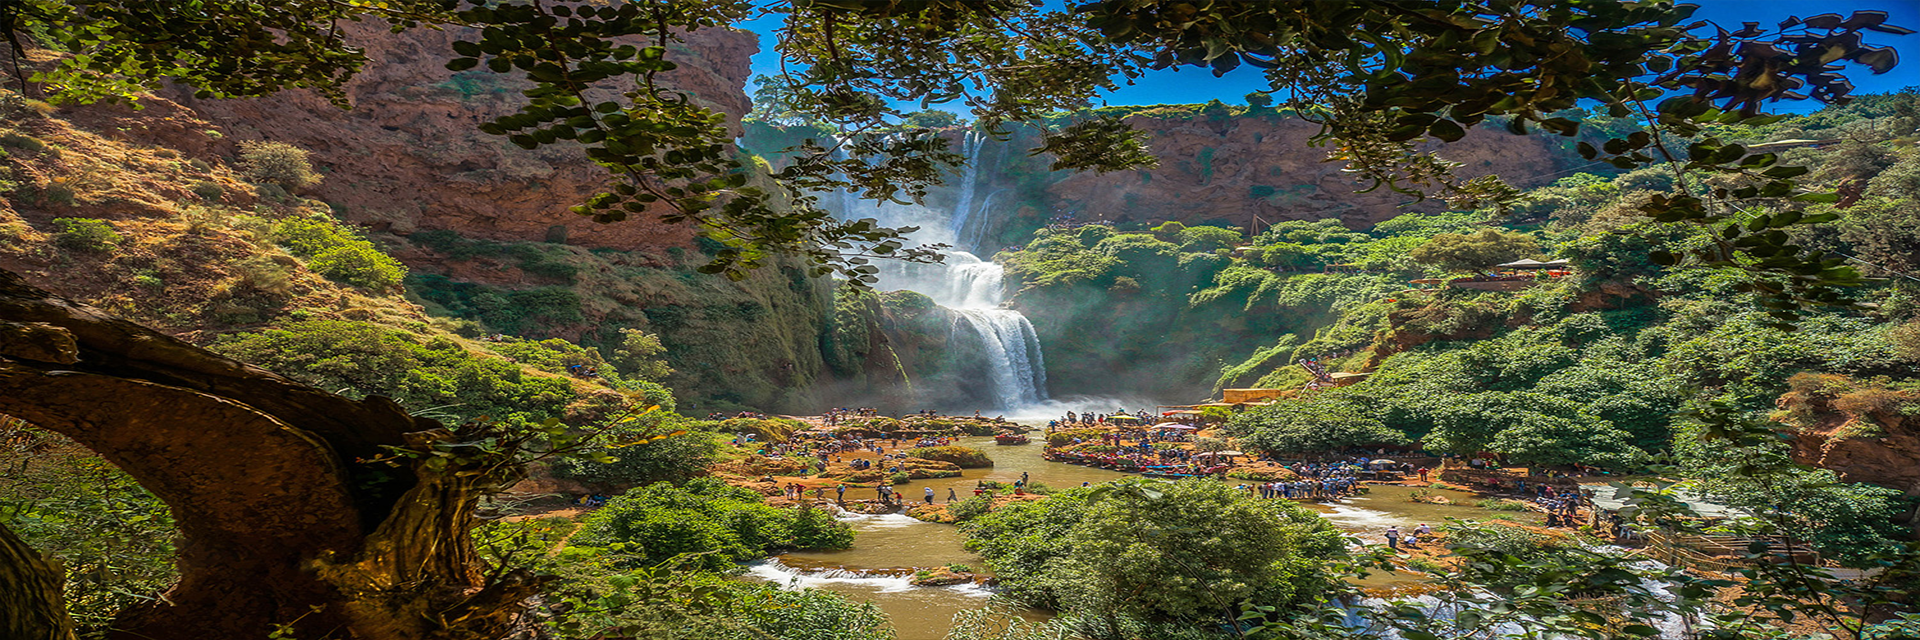 OUZOUD WATERFALLS FULL-DAY TOUR FROM MARRAKECH